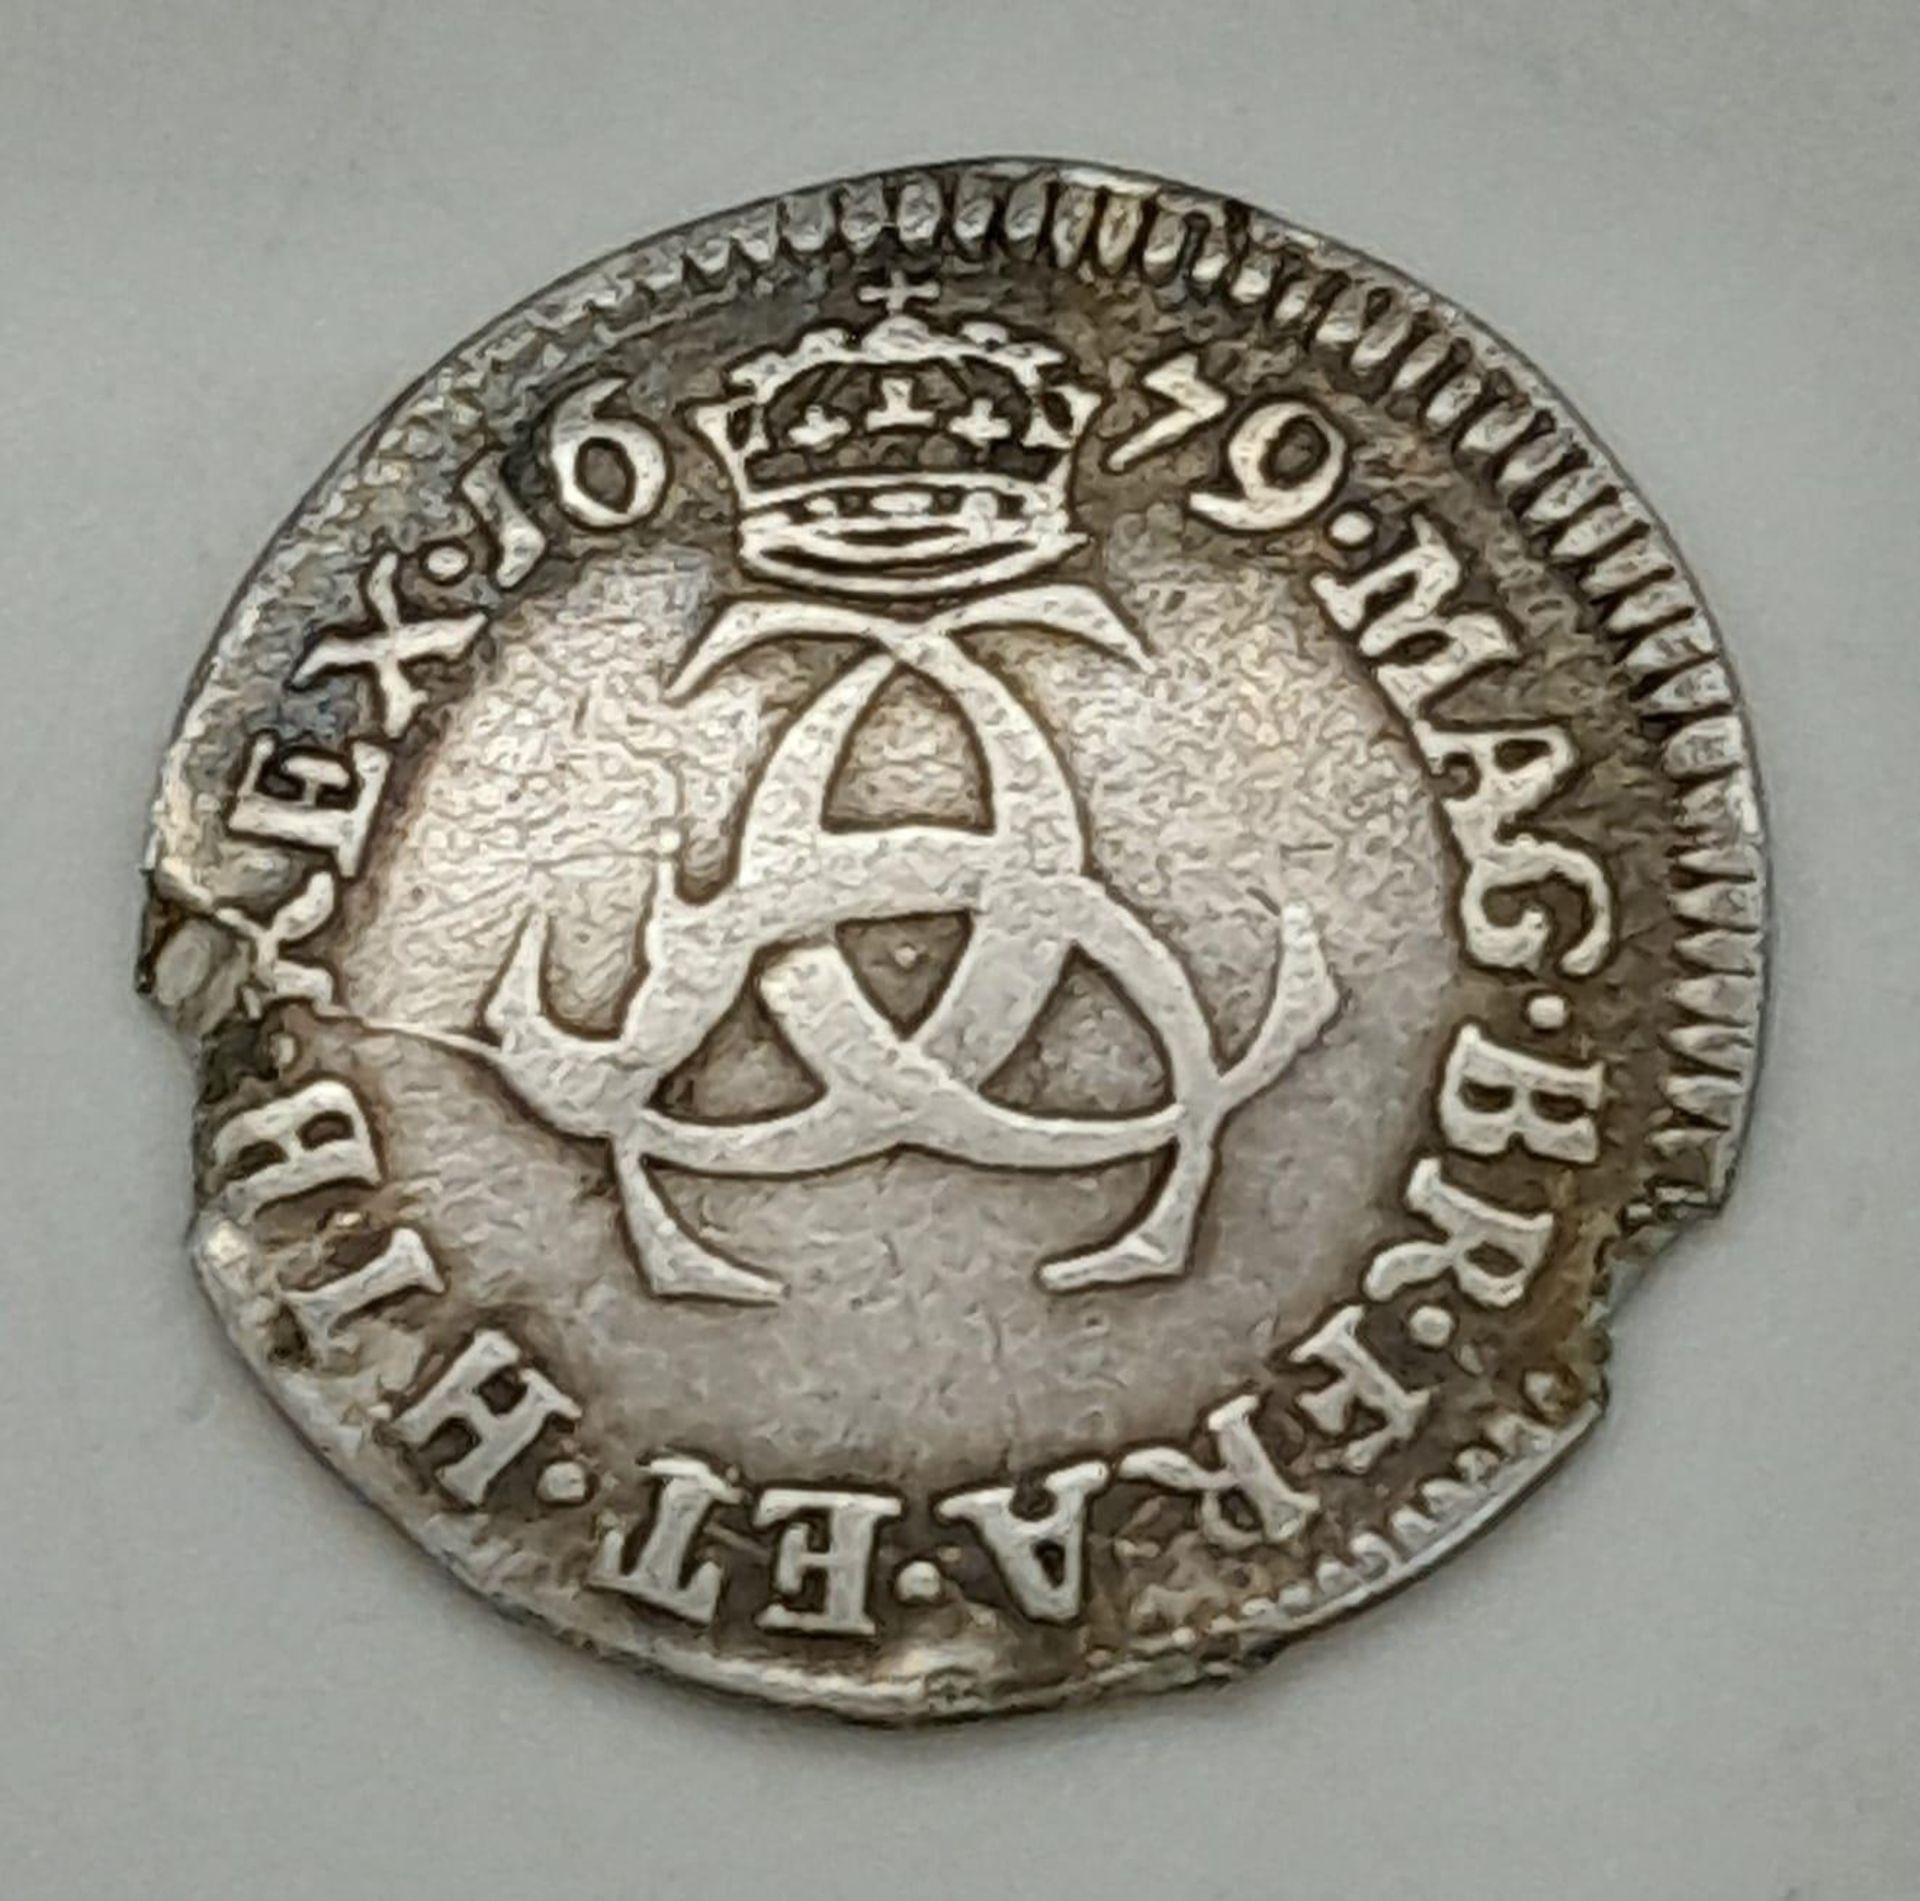 A Charles II 1679 Silver Threepence Coin. Please see photos for conditions